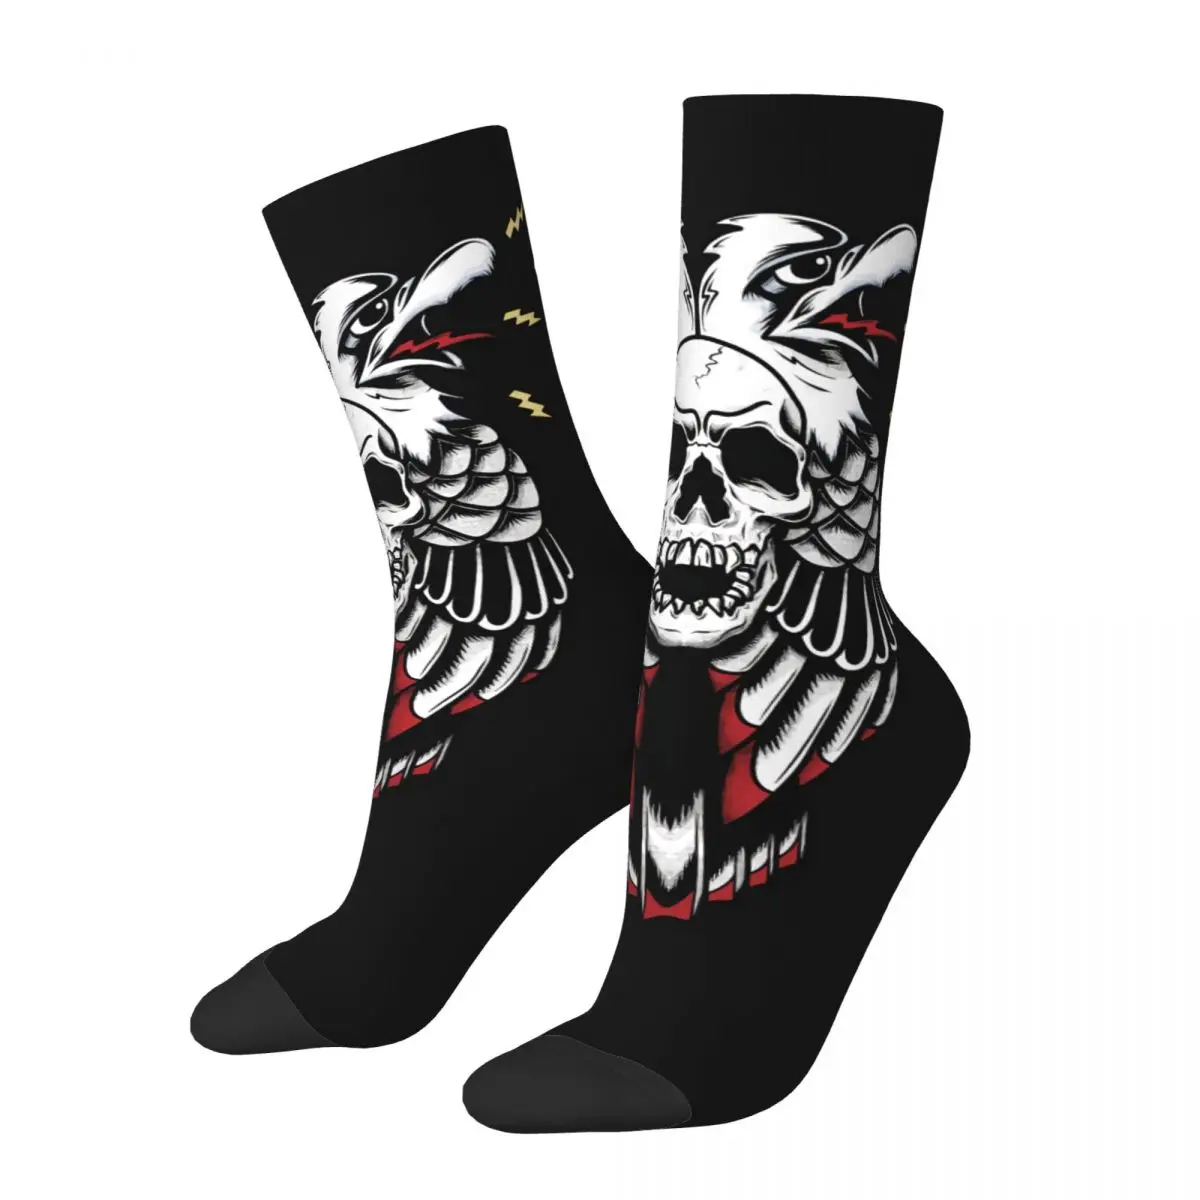 Funny Crazy compression Sock for Men Freedom Fighter Hip Hop Harajuku Tattoo Style Happy Quality Pattern Printed Boys Crew Sock